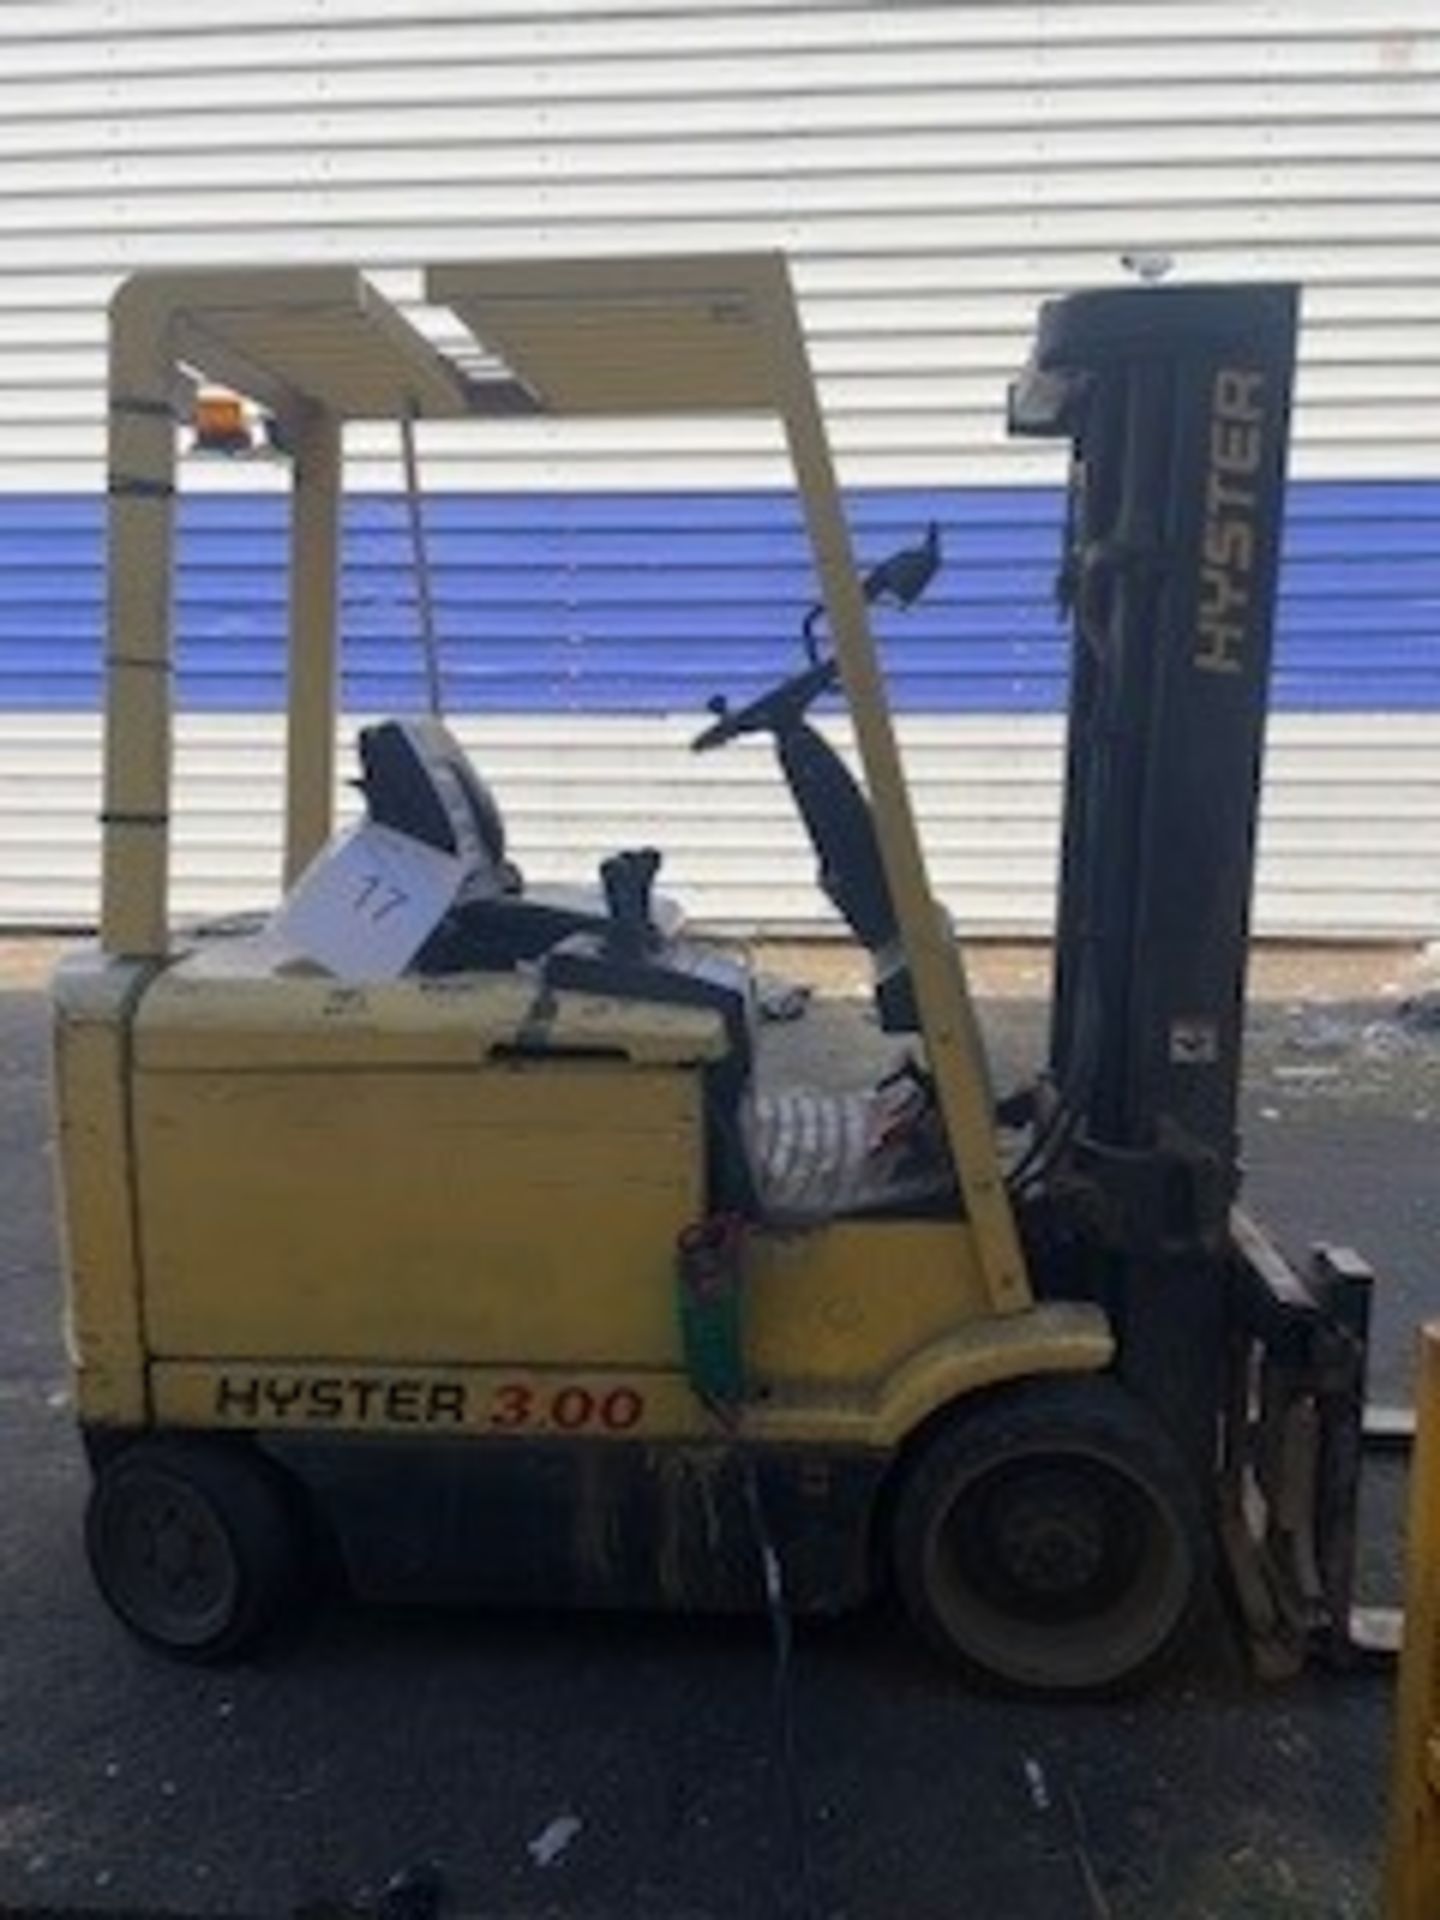 Hyster Electric Forklift Truck Model E3.00XM-847 **will required to be retained until site cleared* - Image 2 of 4